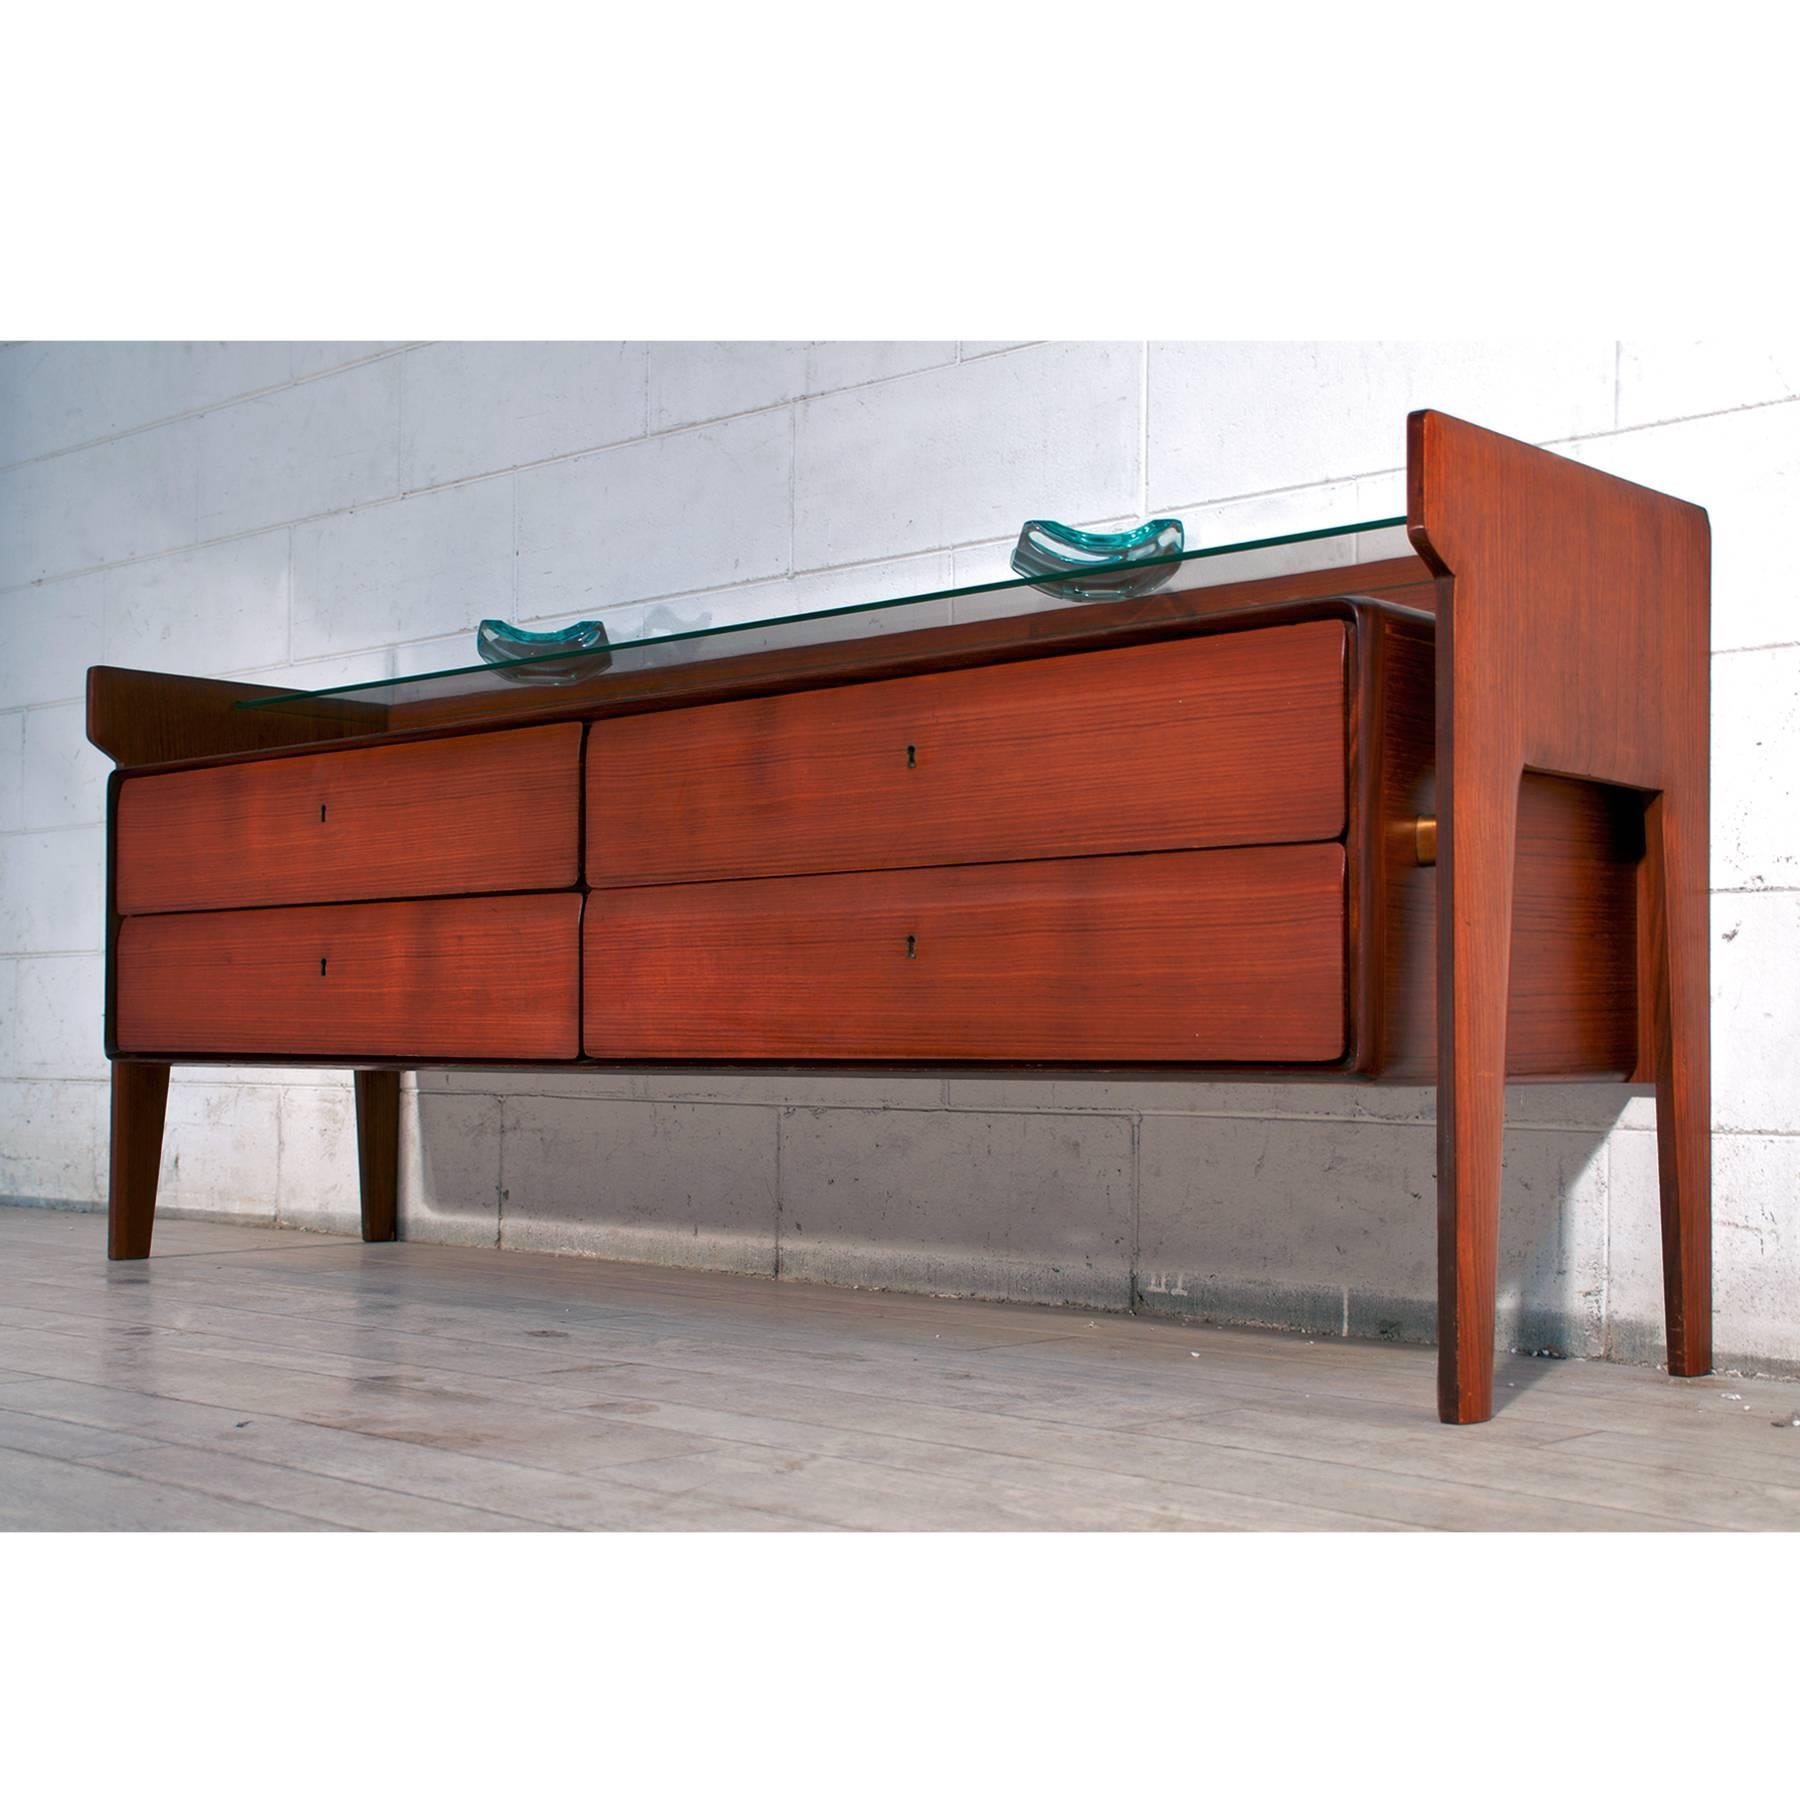 Stylish Italian dresser of the 1950s, made in gorgeous material like teak wood veneered in reddish tint, finished with brass details and equipped with a suspended glass shelf and four drawers.
Its conditions of the period are very good as the images